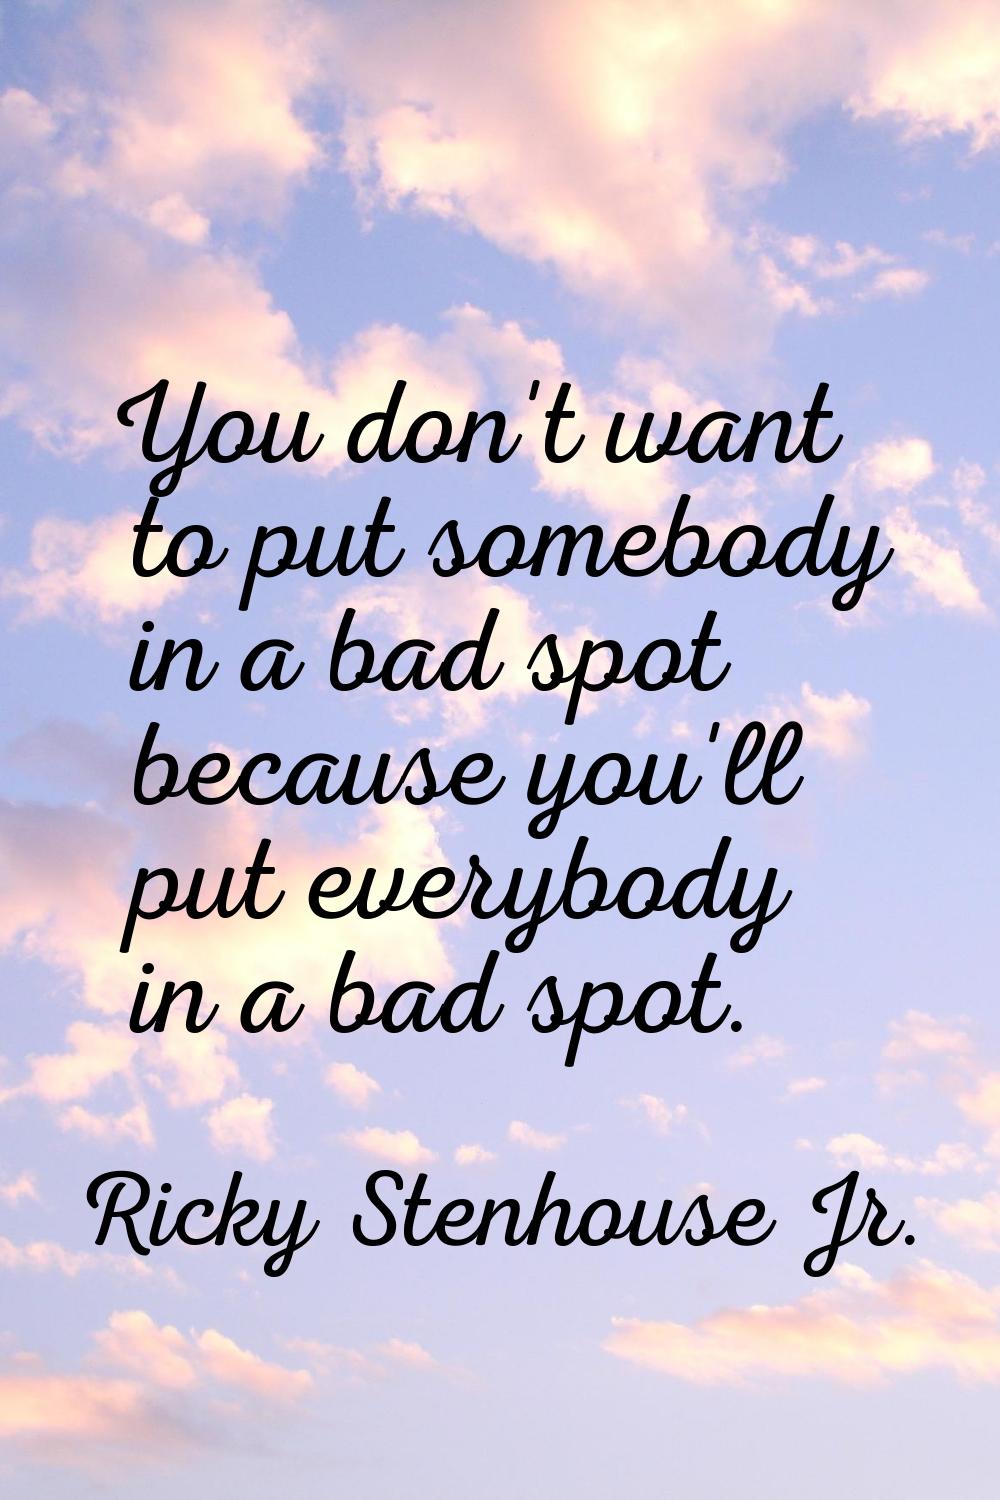 You don't want to put somebody in a bad spot because you'll put everybody in a bad spot.